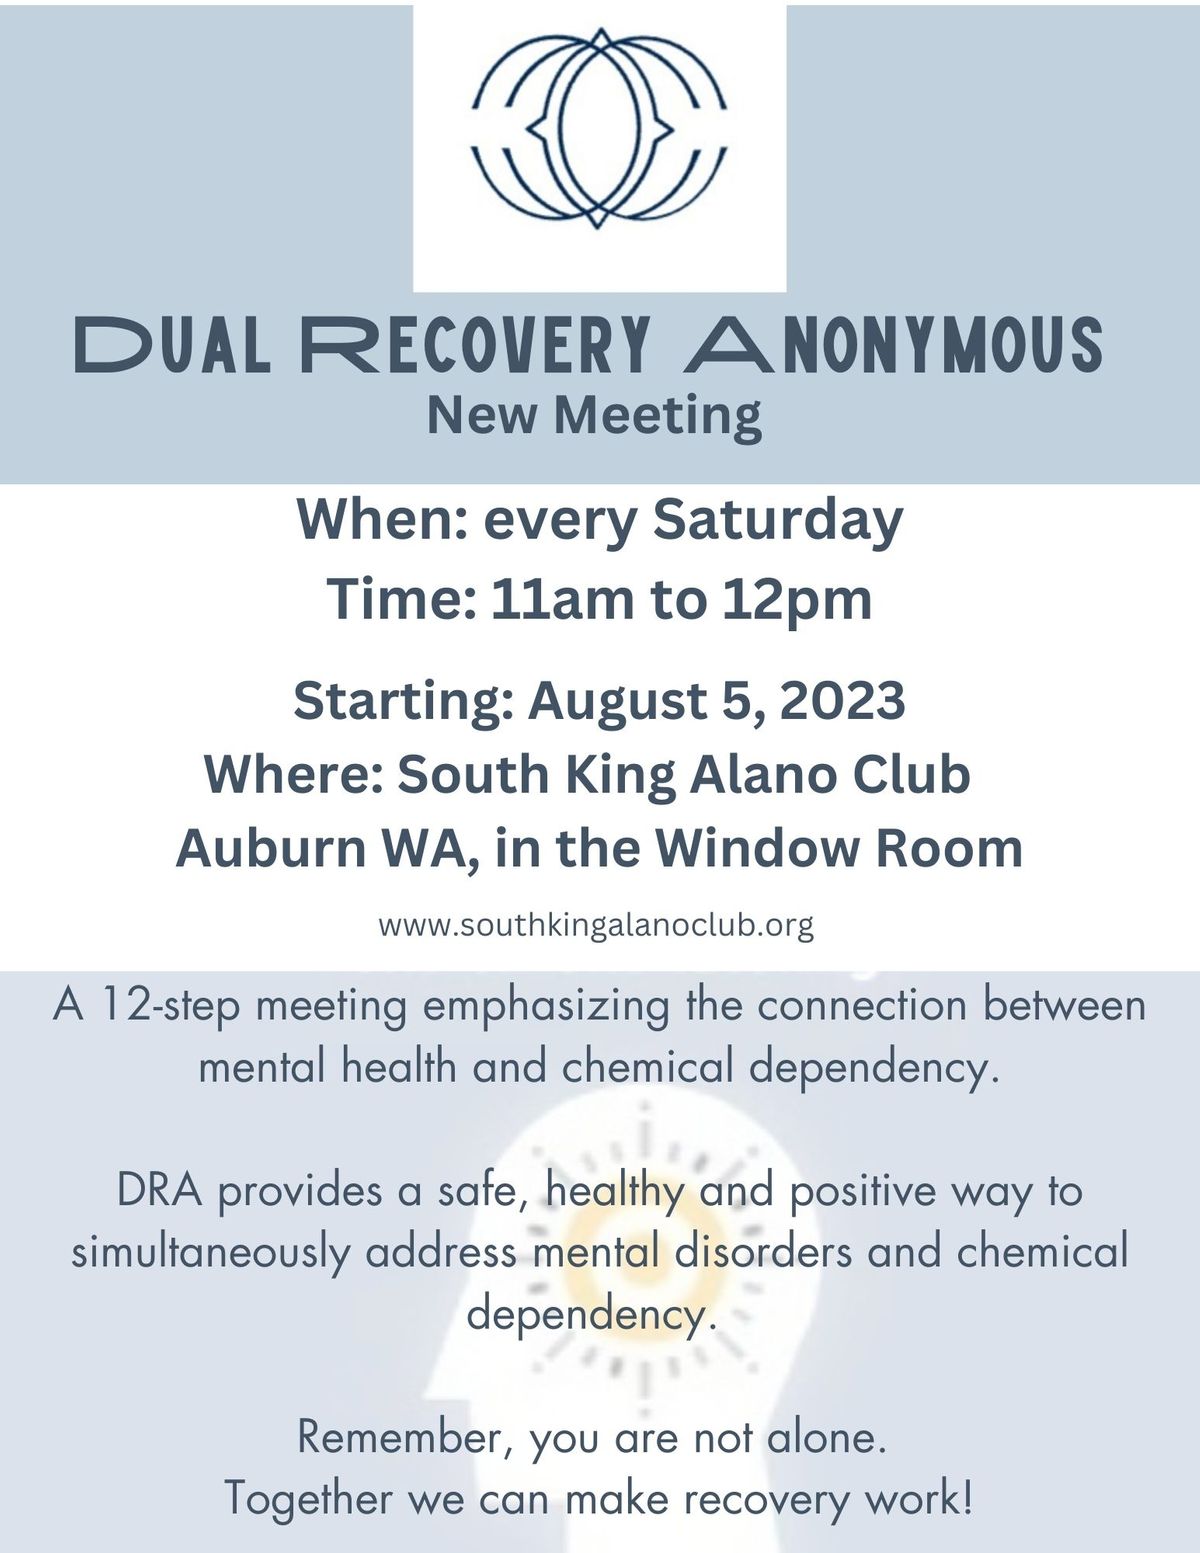 Dual Recovery Anonymous meeting flyer - created August 2023.jpg